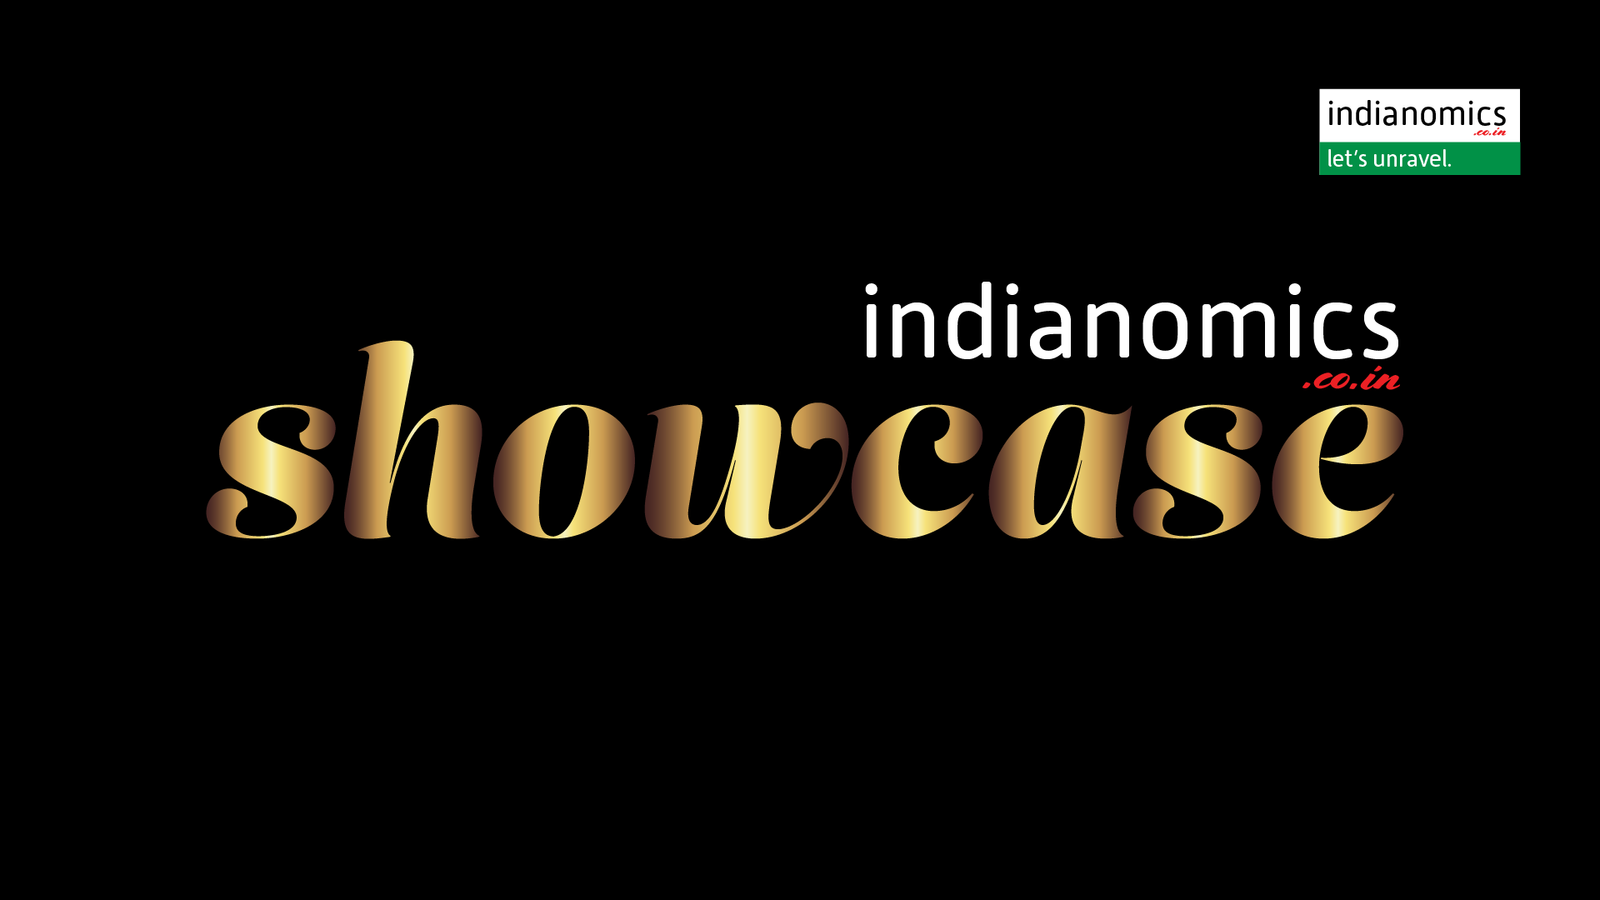 We often forget that world around us have a stimulus, playing its role in silence, while we are aloof of it. Indianomics Showcase brings out people and groups from cold, and showcases them.